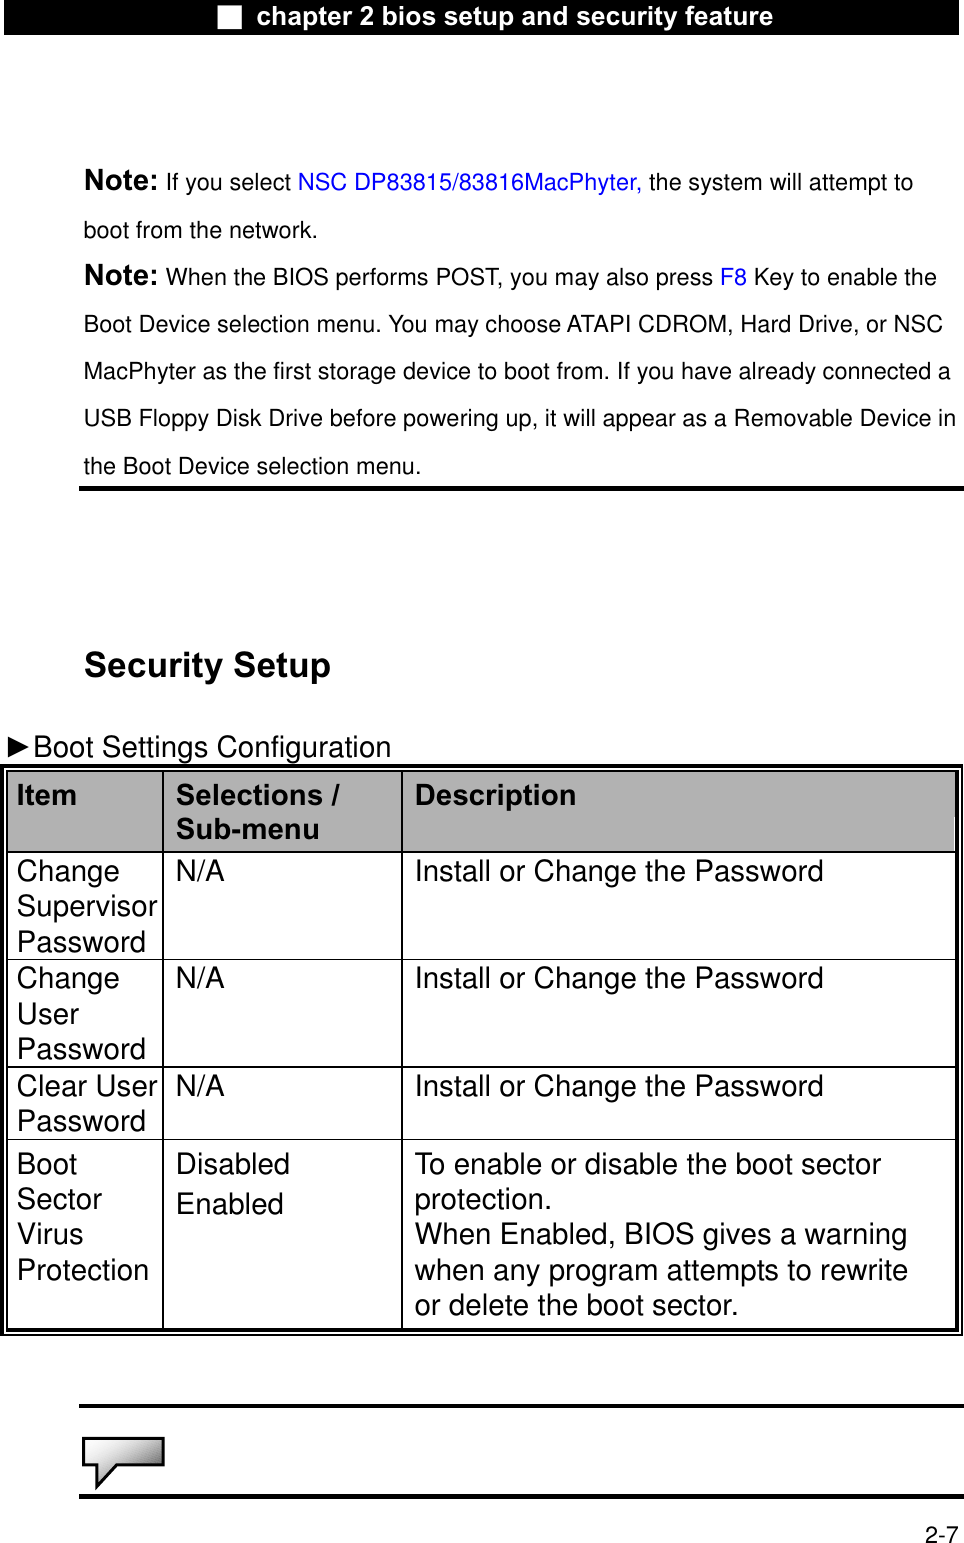 Ϯ chapter 2 bios setup and security featureNote: If you select NSC DP83815/83816MacPhyter, the system will attempt to boot from the network.Note: When the BIOS performs POST, you may also press F8 Key to enable the Boot Device selection menu. You may choose ATAPI CDROM, Hard Drive, or NSCMacPhyter as the first storage device to boot from. If you have already connected a USB Floppy Disk Drive before powering up, it will appear as a Removable Device in the Boot Device selection menu.Security Setup ŹBoot Settings ConfigurationItem Selections /Sub-menuDescriptionChangeSupervisorPasswordN/A Install or Change the Password ChangeUserPasswordN/A Install or Change the Password Clear UserPassword N/A Install or Change the Password BootSectorVirusProtectionDisabledEnabledTo enable or disable the boot sectorprotection.When Enabled, BIOS gives a warningwhen any program attempts to rewrite or delete the boot sector.2-7